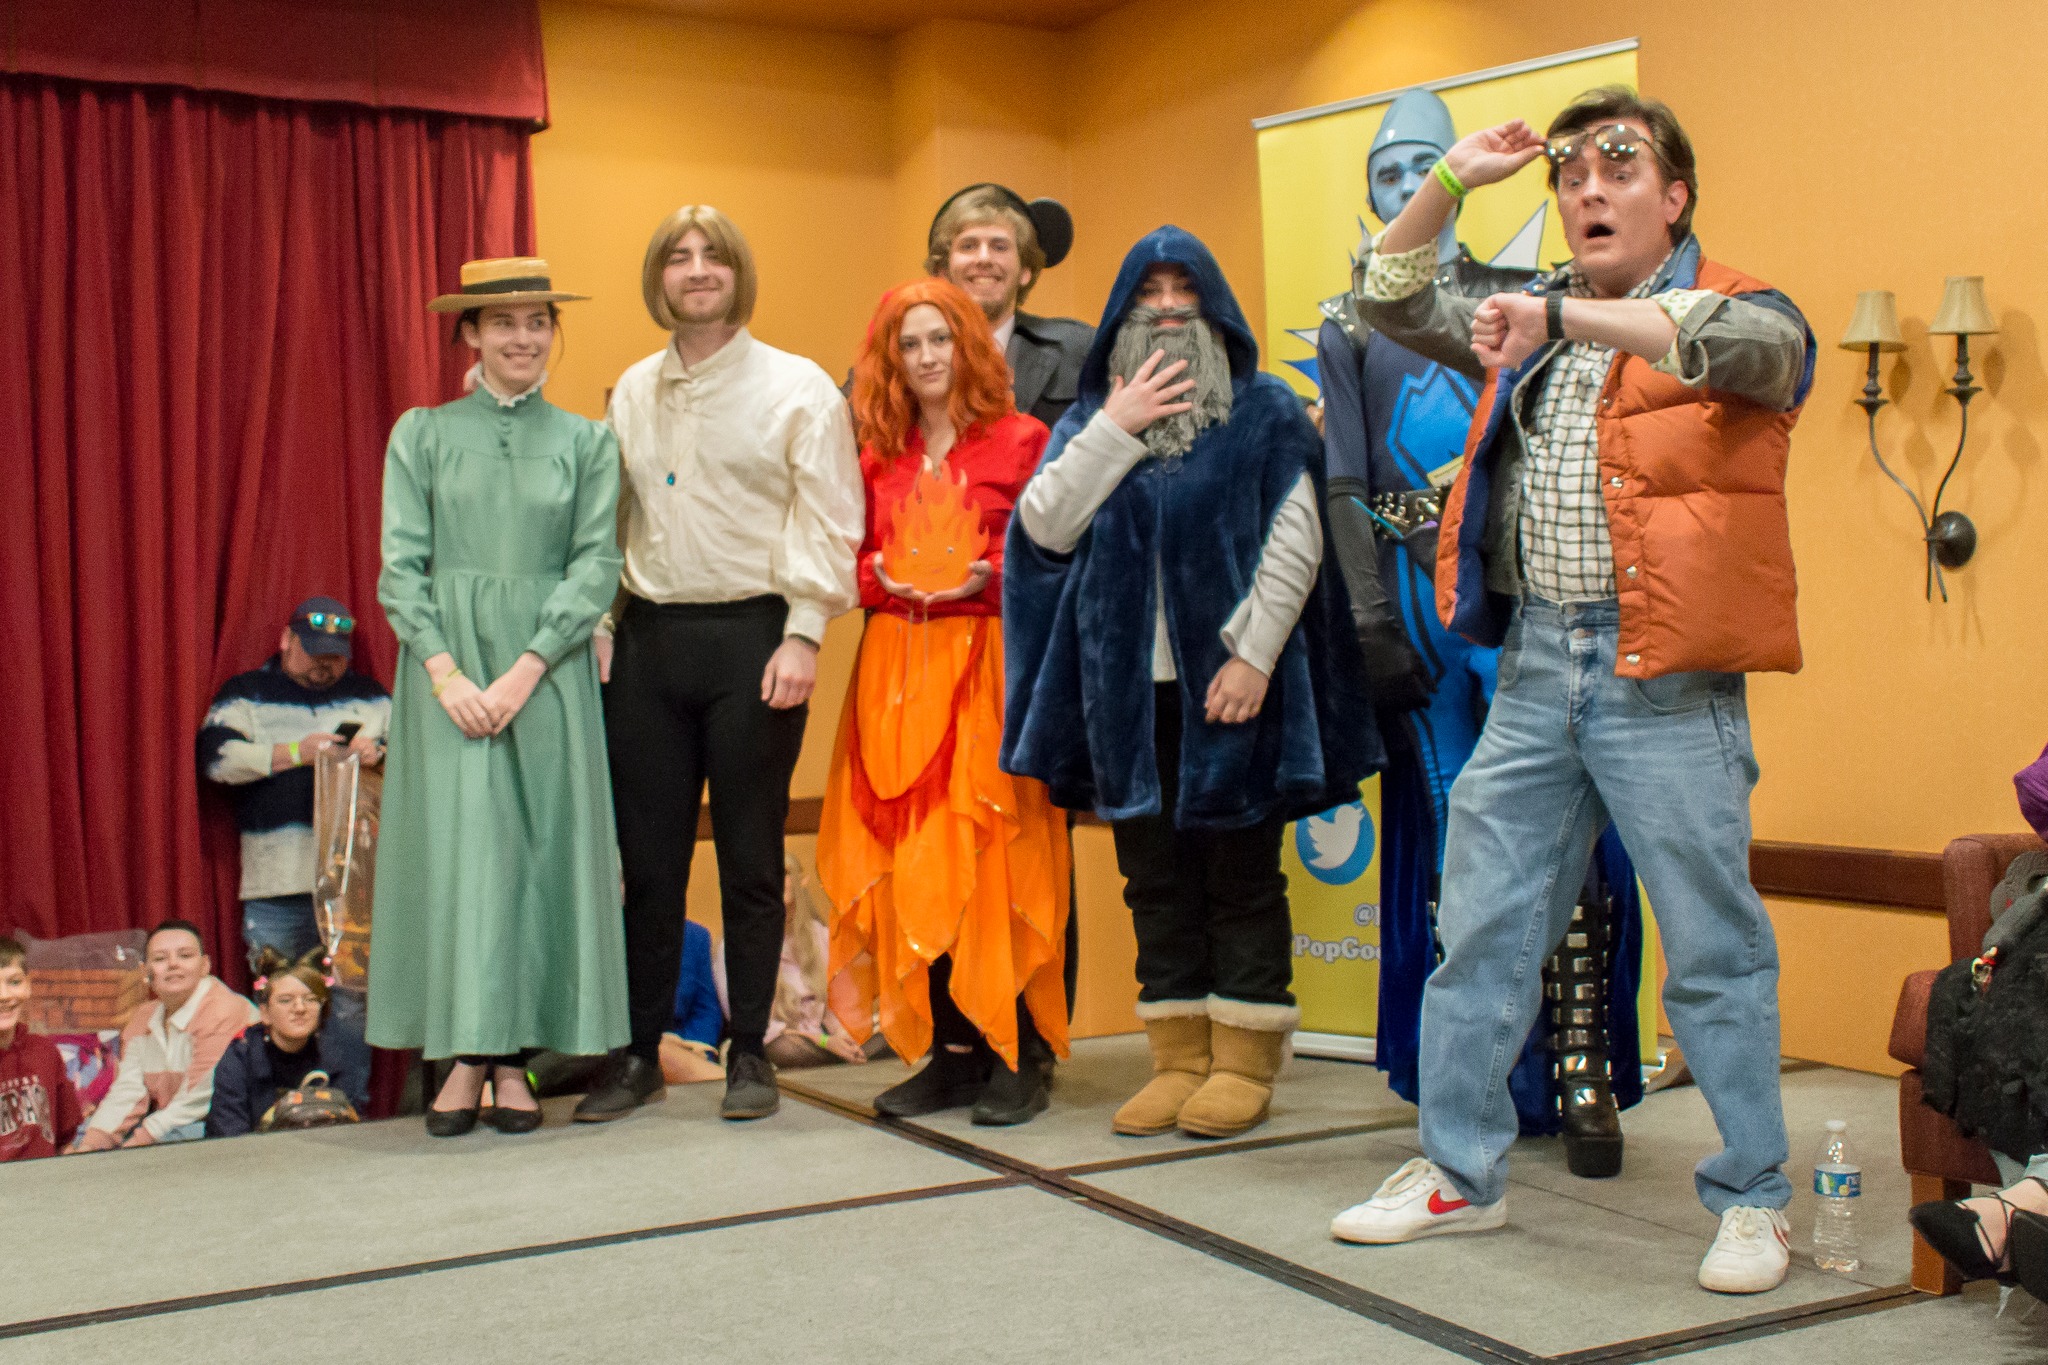 A group of people dressed in cosplay stand on a stage